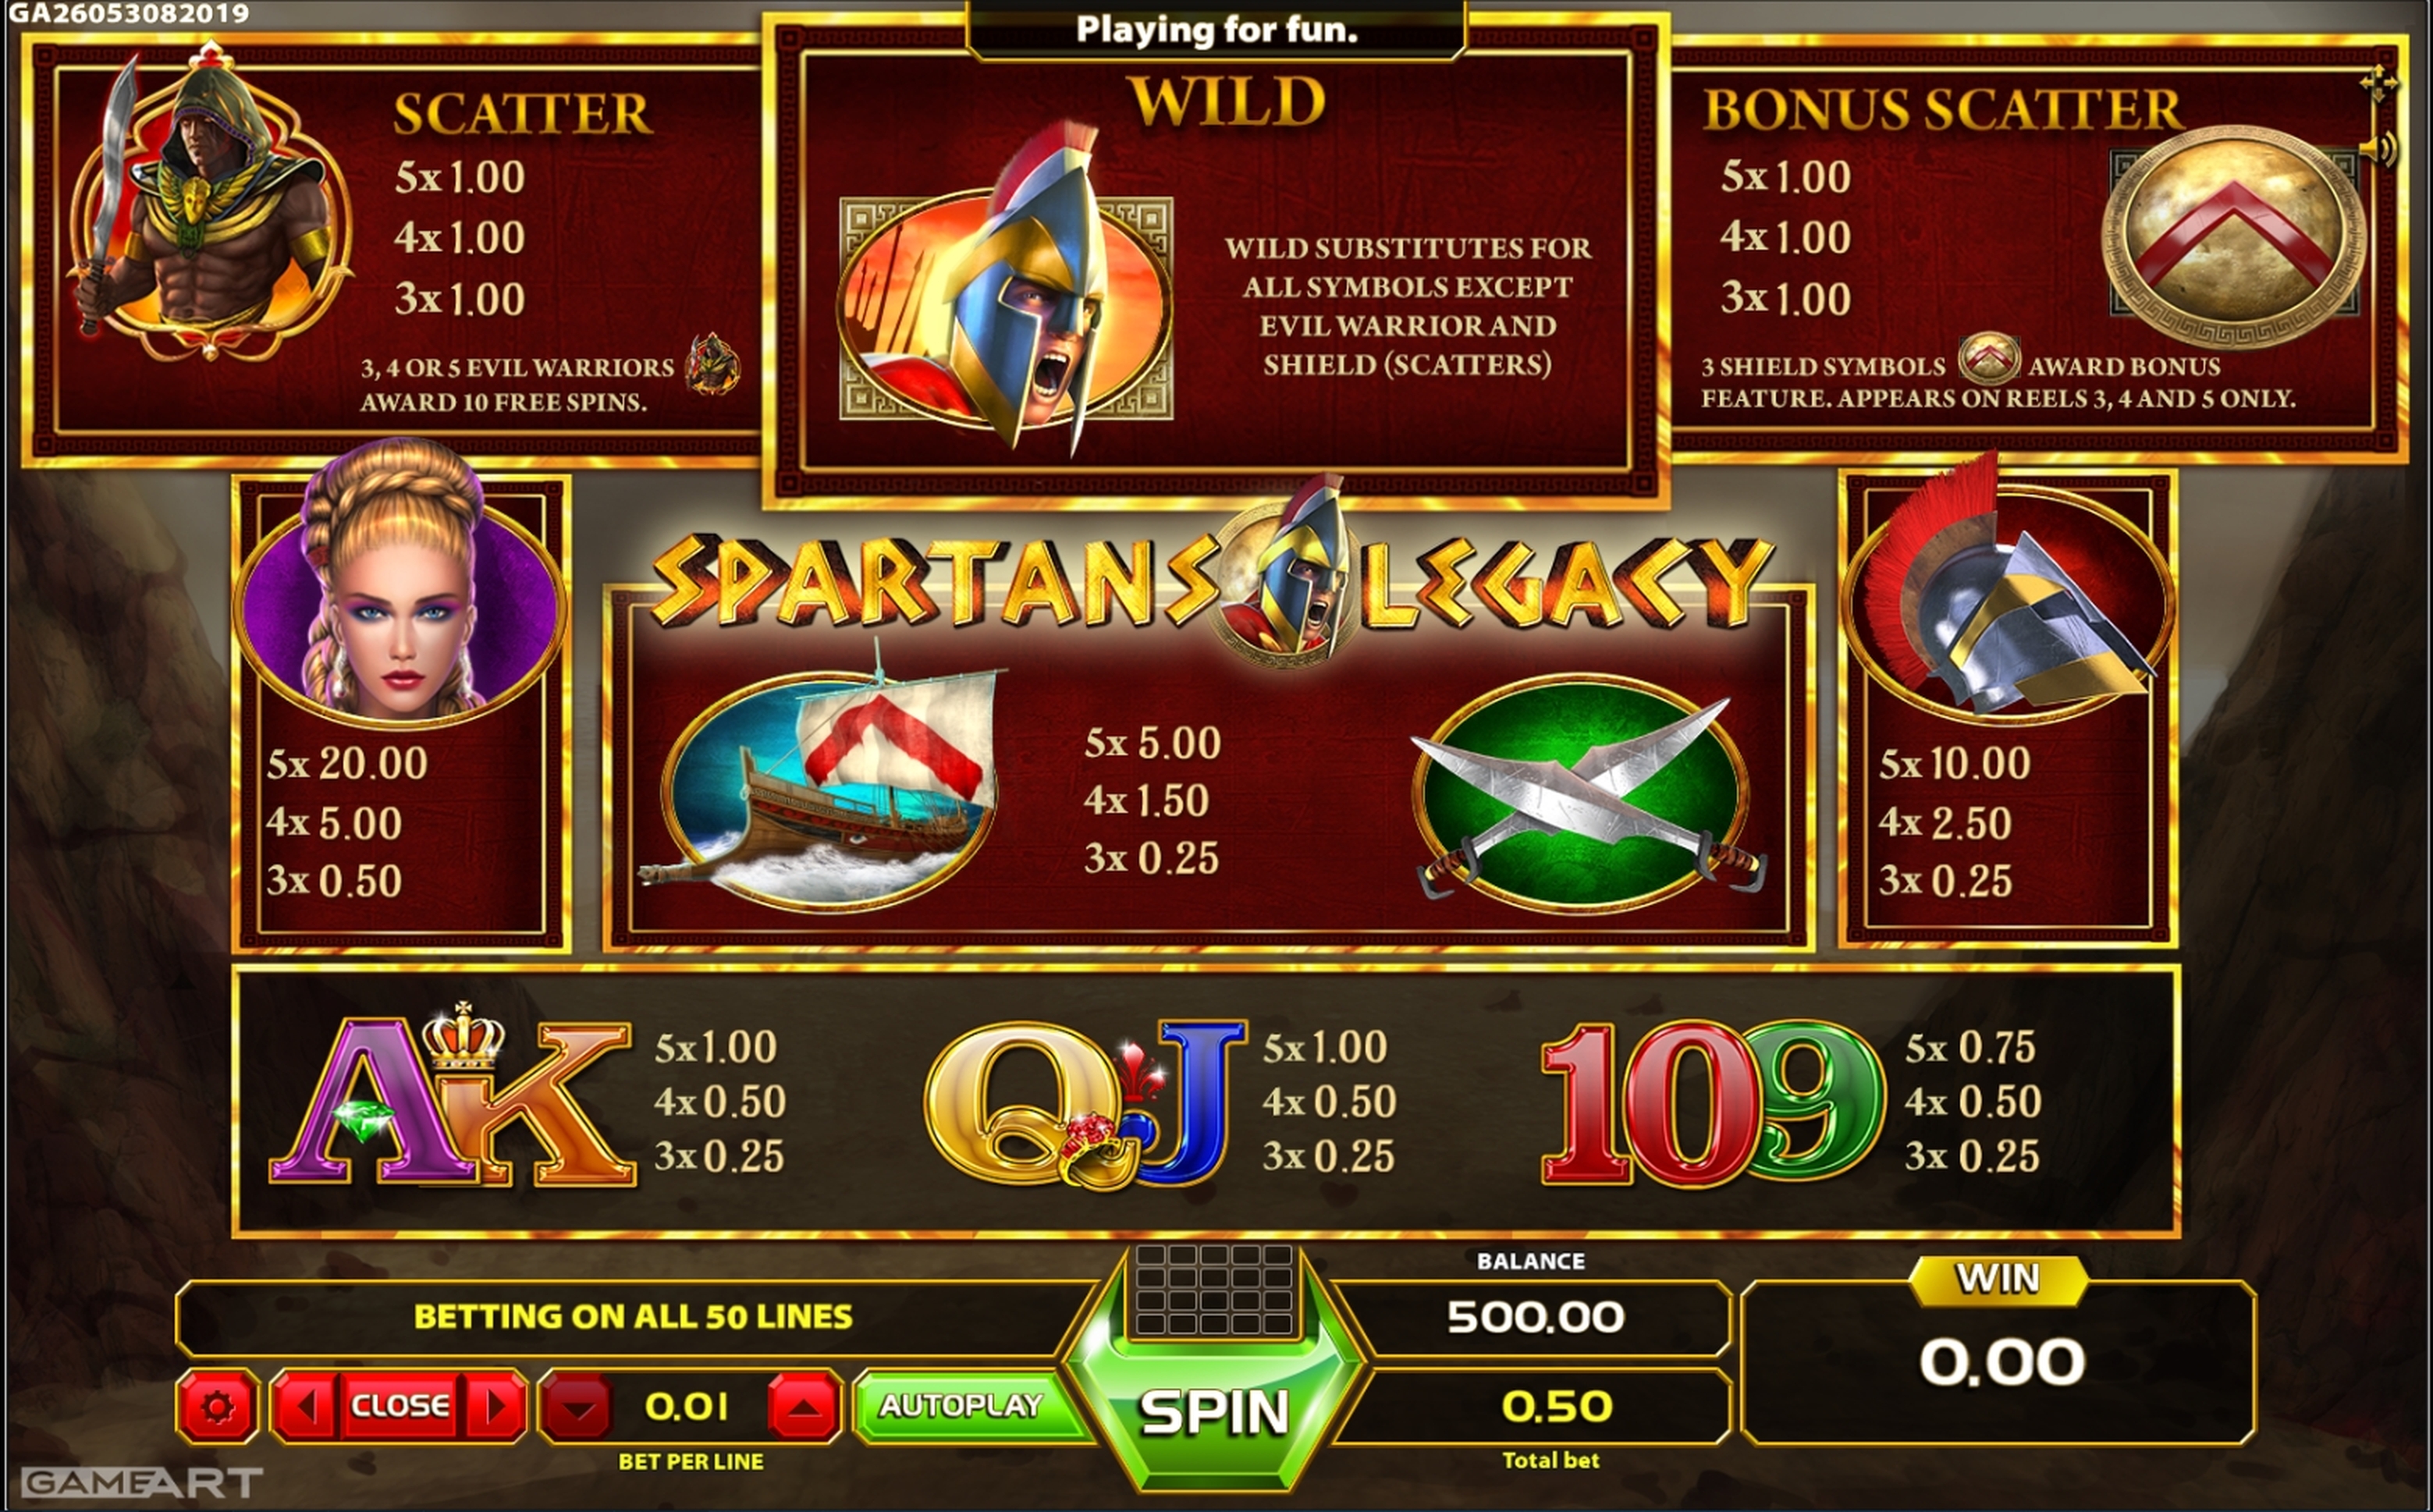 Info of Spartans Legacy Slot Game by GameArt